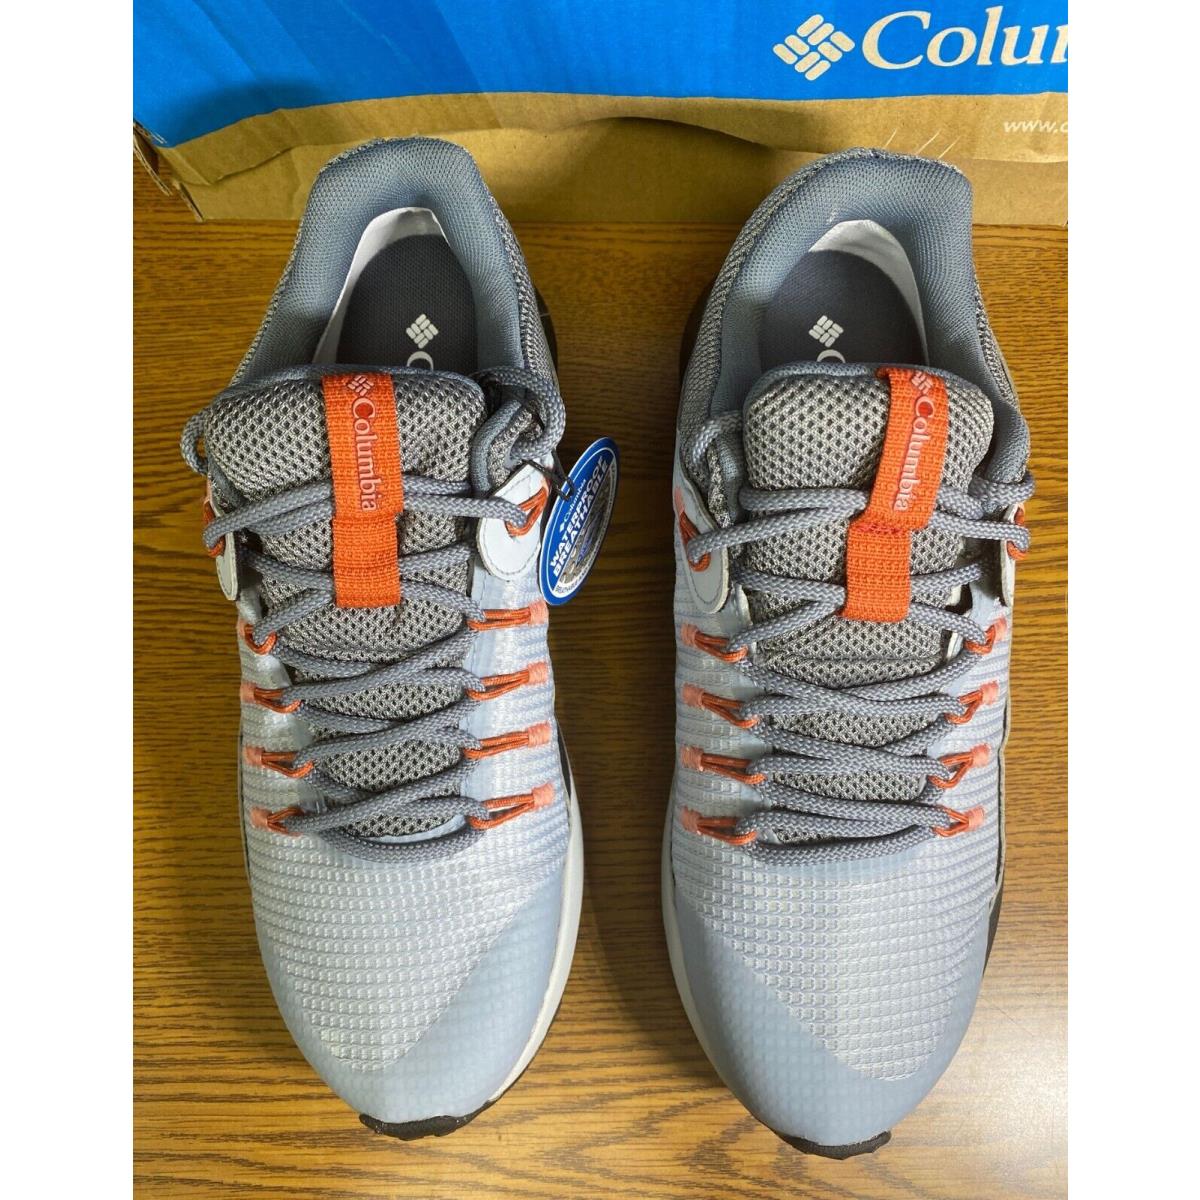 Columbia Trailstorm BL0156-013 Womens Cirrus Grey Lace Up Running Shoes Size 9.5